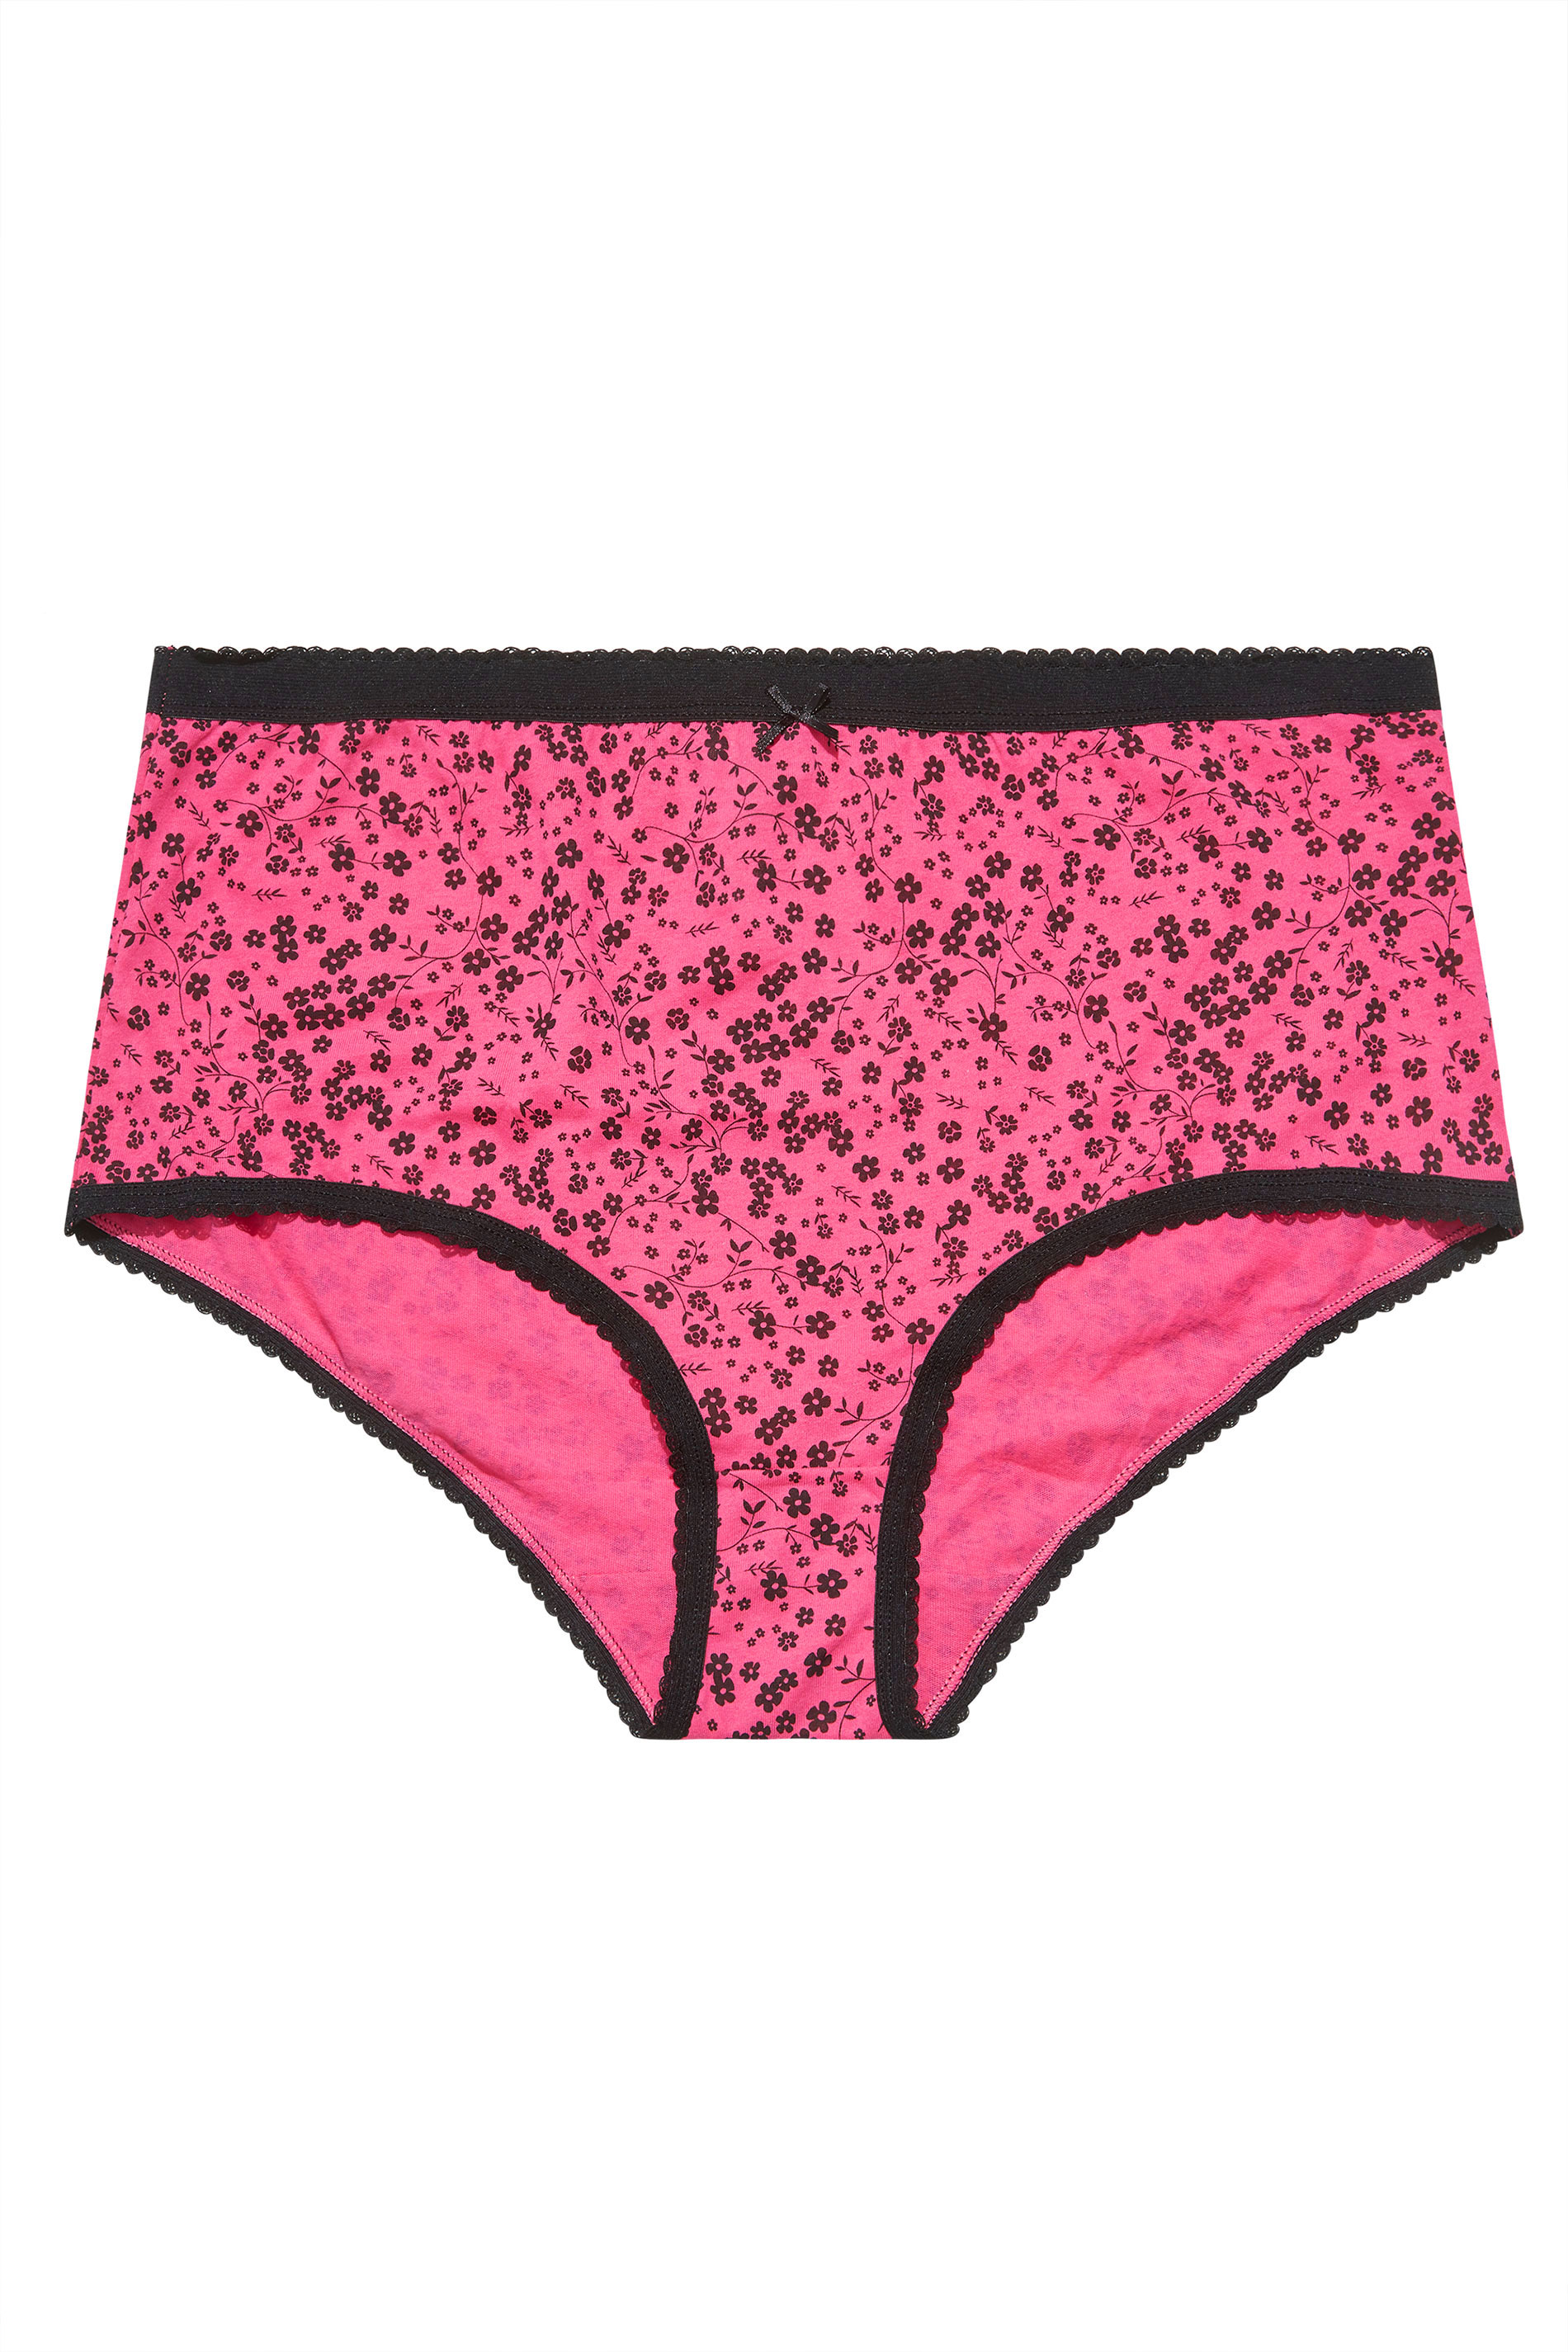 Plus Size 5 PACK Pink & Black Floral Print High Waisted Full Briefs | Yours Clothing  3